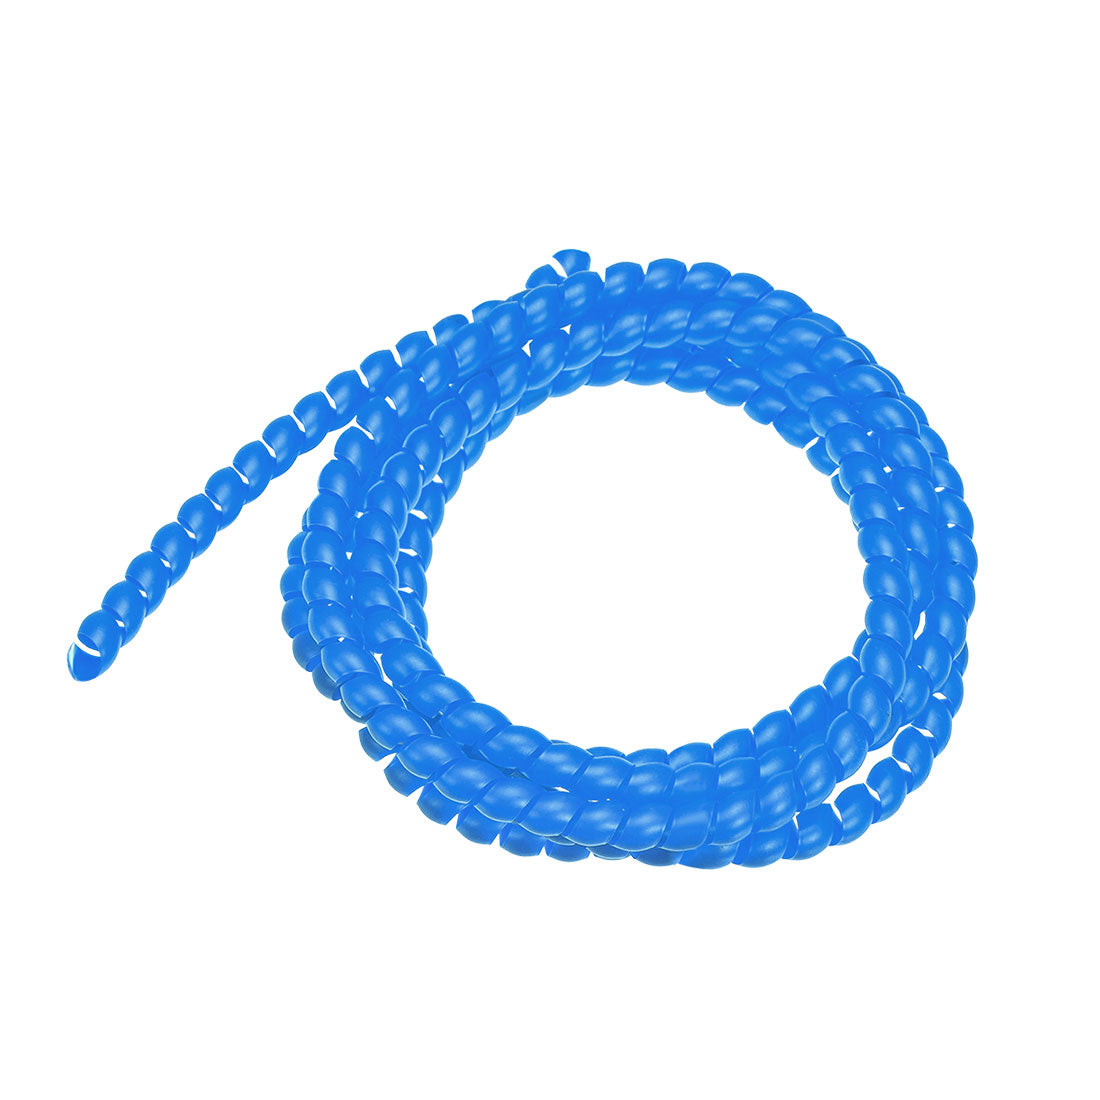 uxcell Uxcell Flexible Spiral Tube Wrap Cable Management Sleeve 8mm x 10mm Computer Wire Manage Cord 2 Meters Length Blue